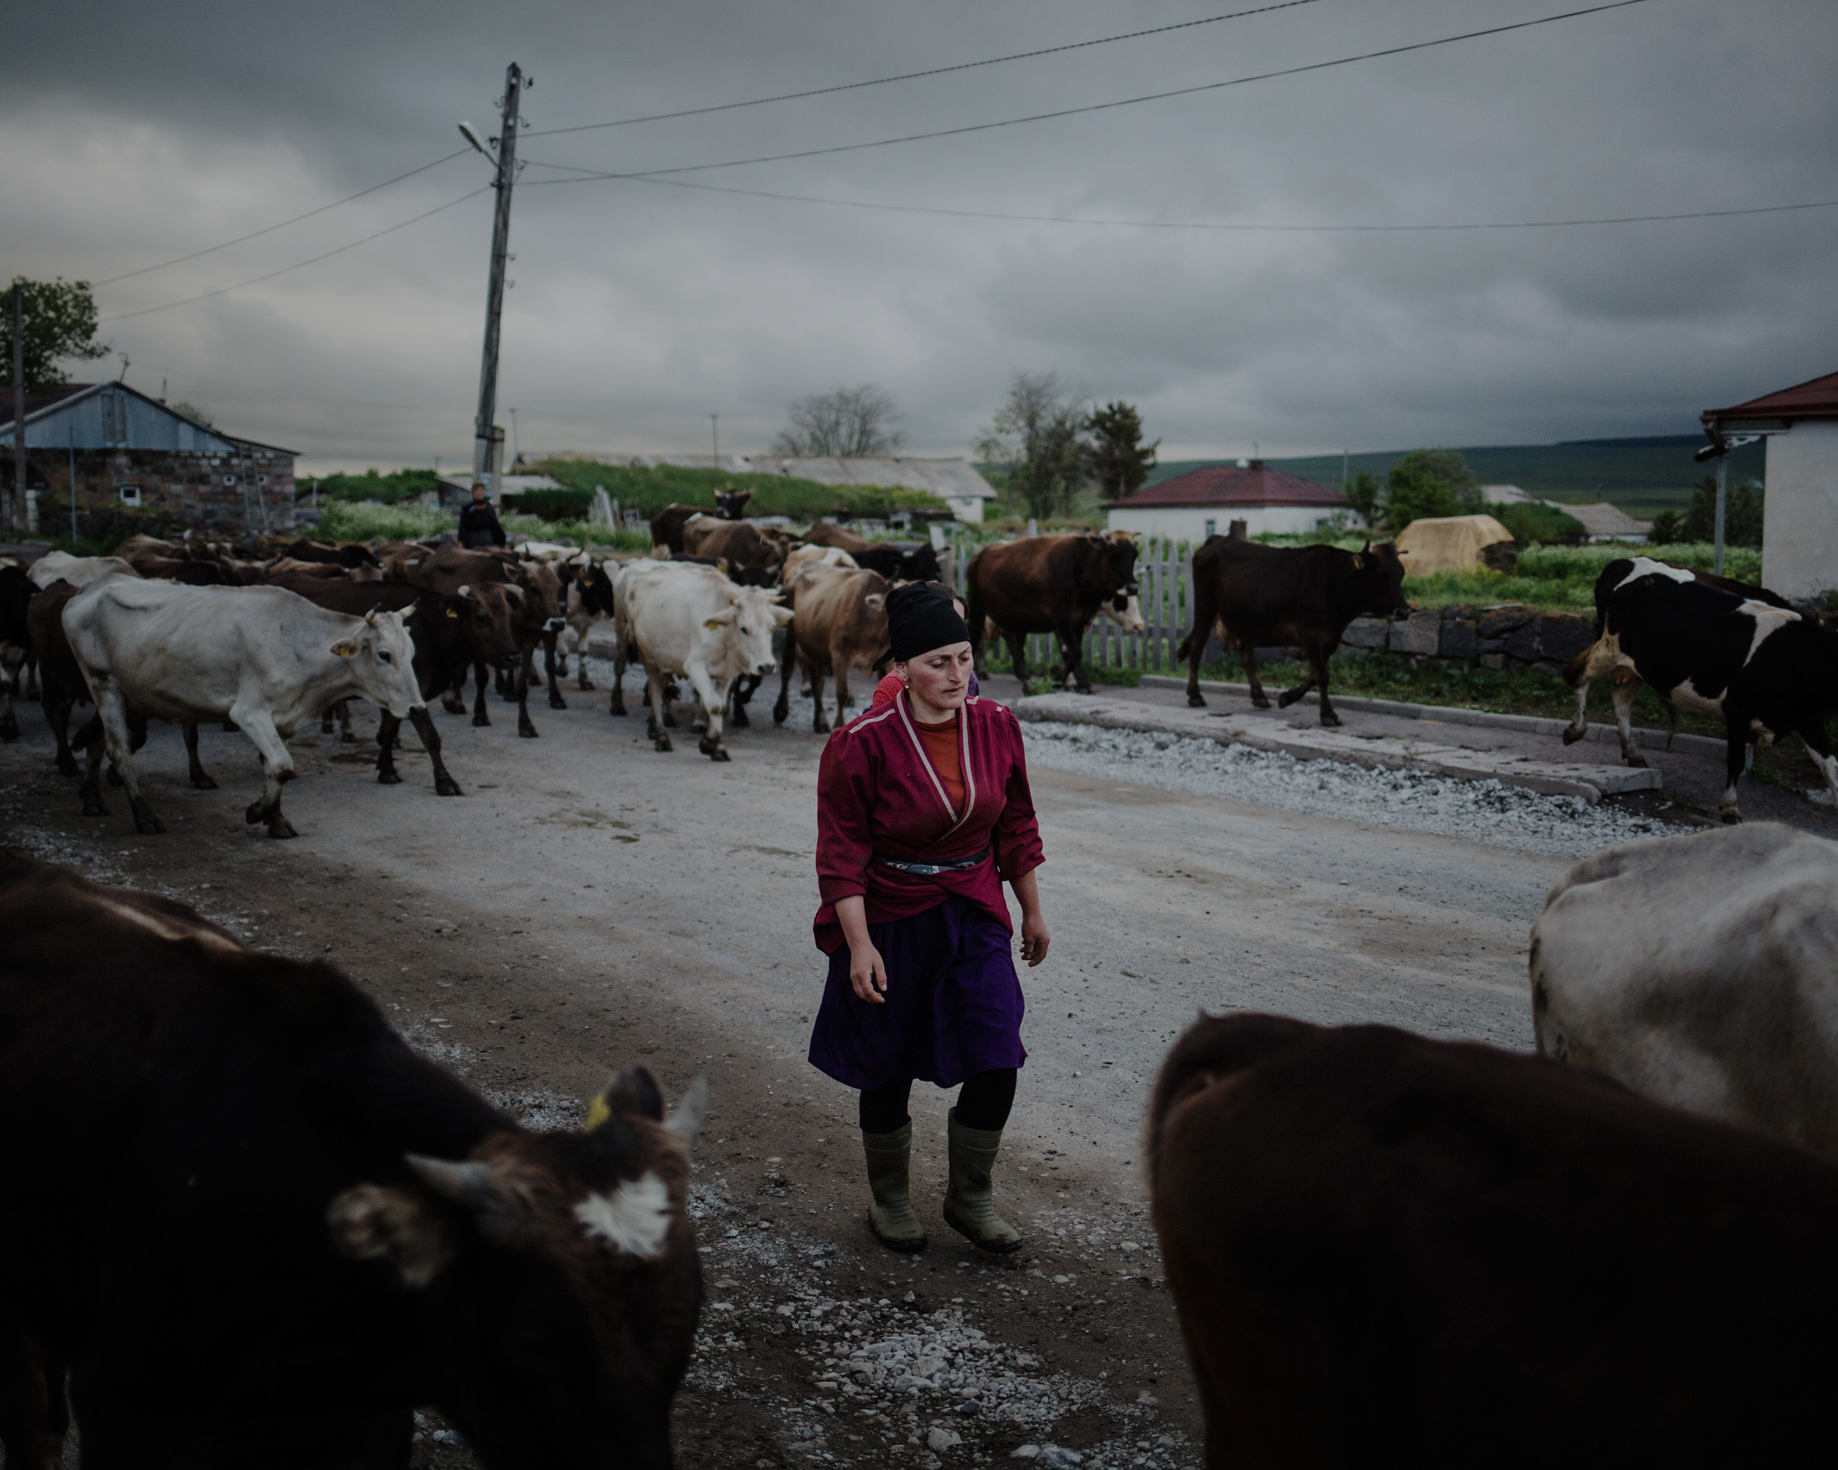  Gorelovka. As cows are coming back from the fields, an Adjarian woman comes to pick her animals. Adjarians who arrived in the region are climatical refugees, they fled landslides in Adjara. 